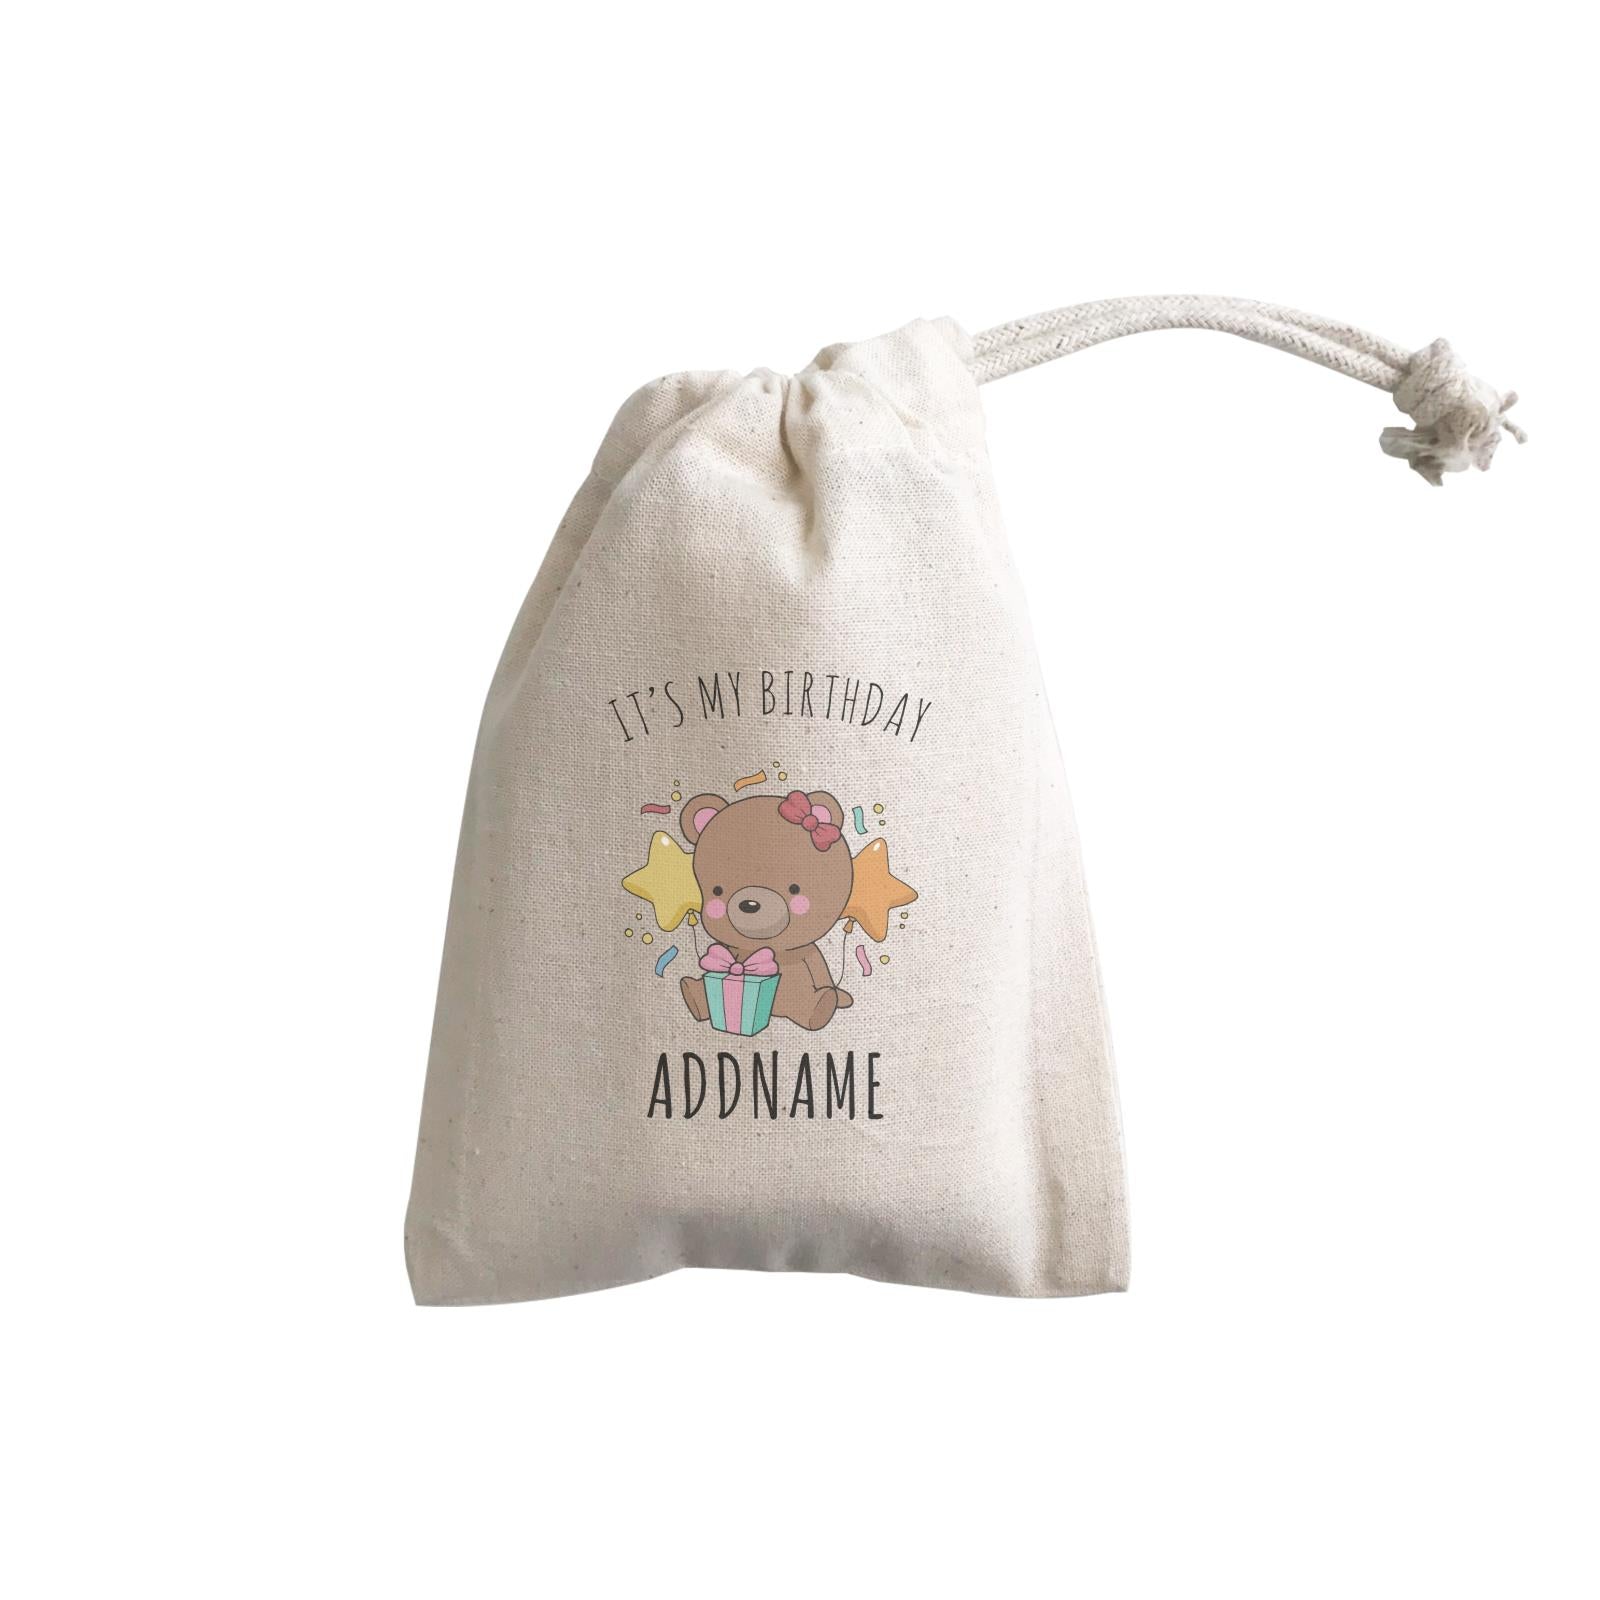 Birthday Sketch Animals Bear with Present It's My Birthday Addname GP Gift Pouch